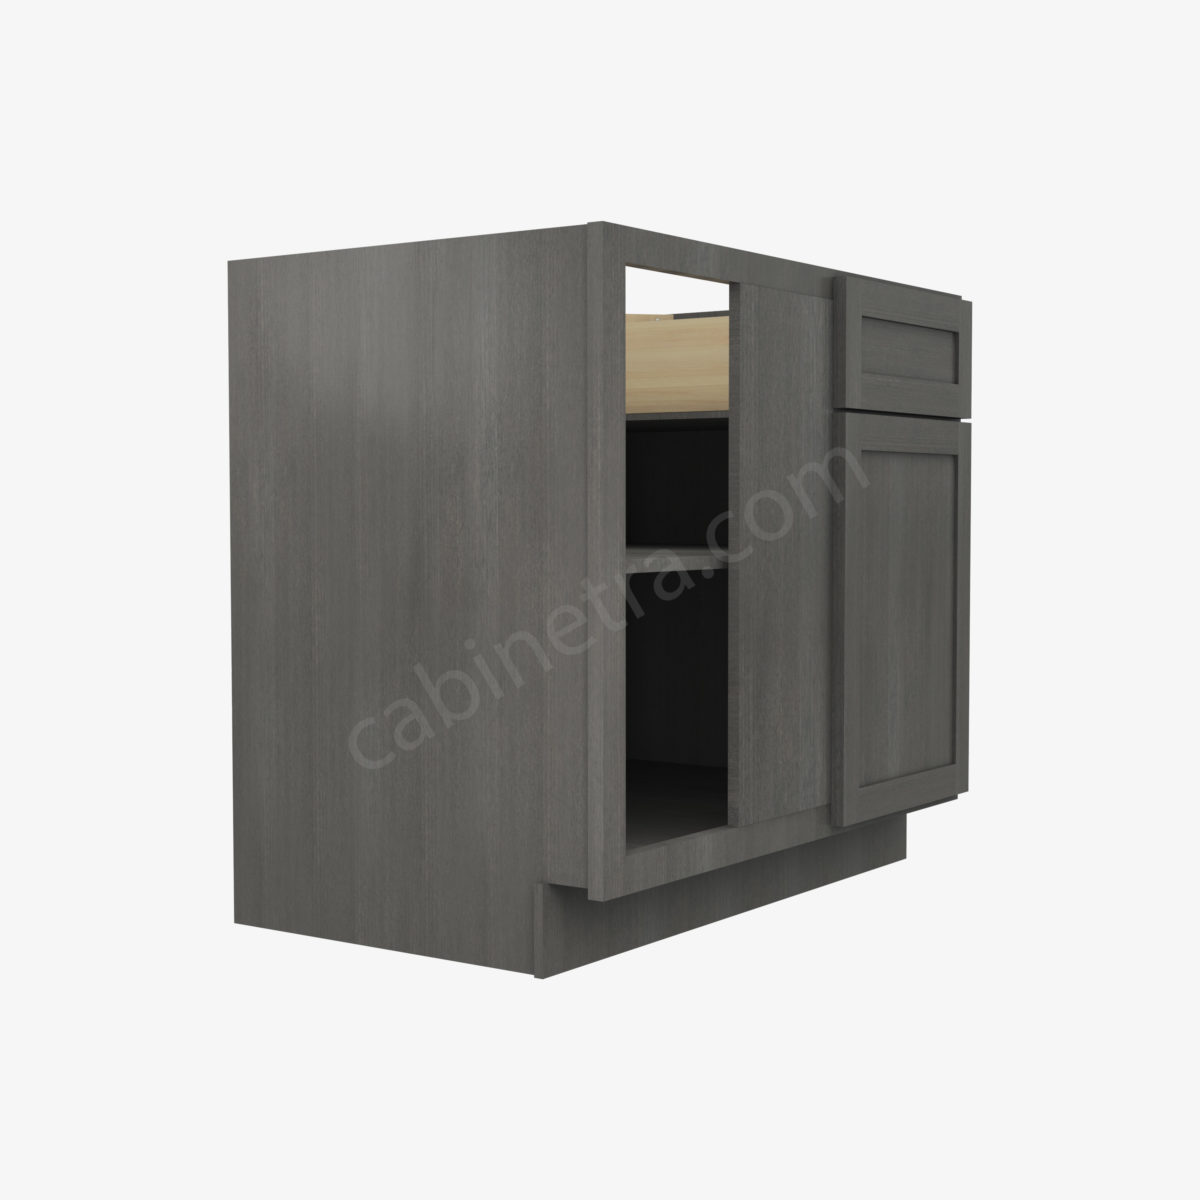 AG BBLC39 42 36W 4 Forevermark Greystone Shaker Cabinetra scaled